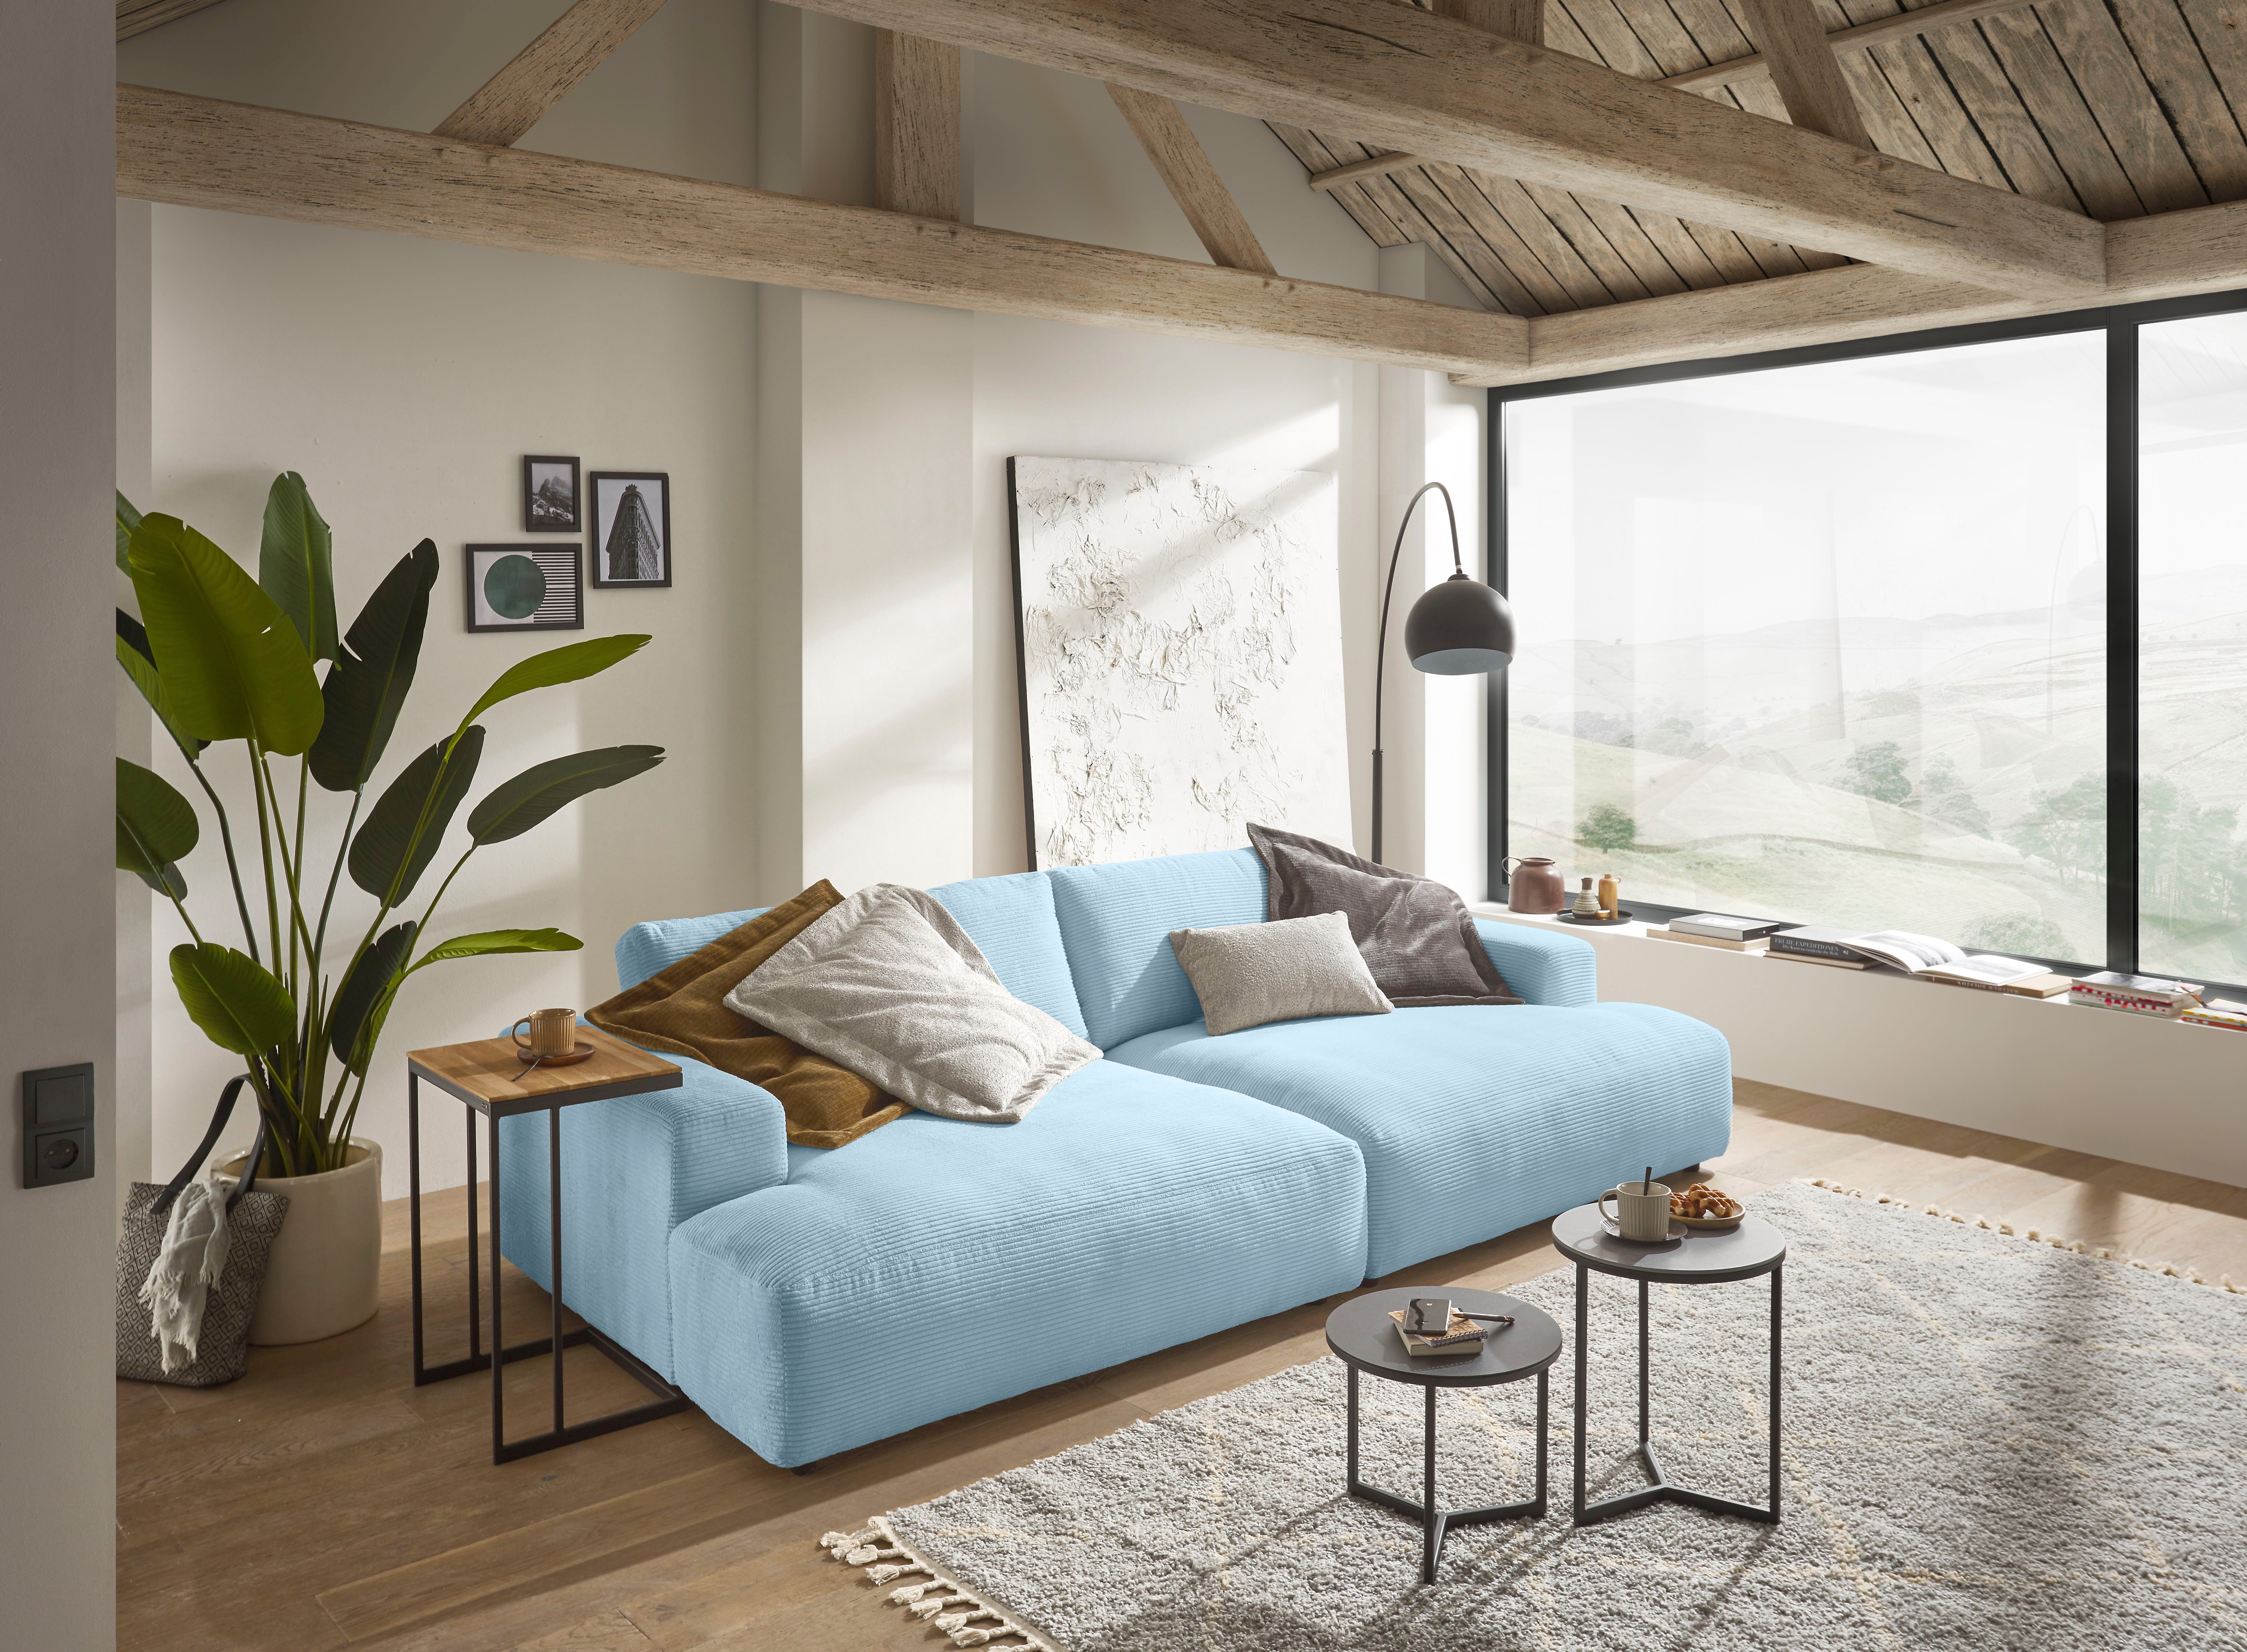 GALLERY M branded by Musterring cm Cord-Bezug, Loungesofa 292 light-blue Lucia, Breite